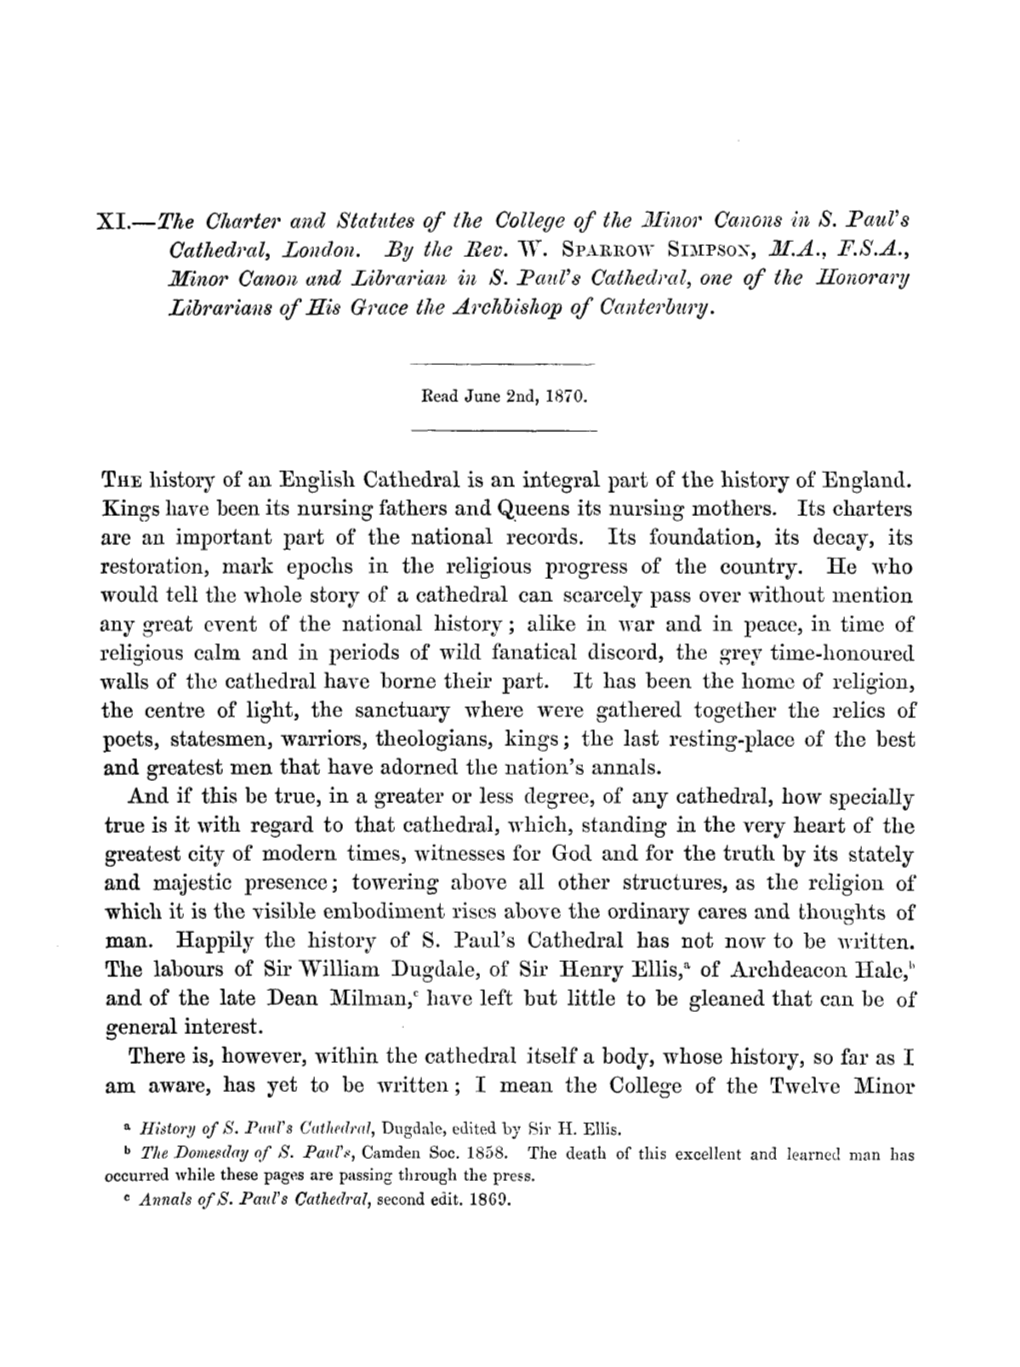 The Charter and Statutes of the College of the Minor Canons in S